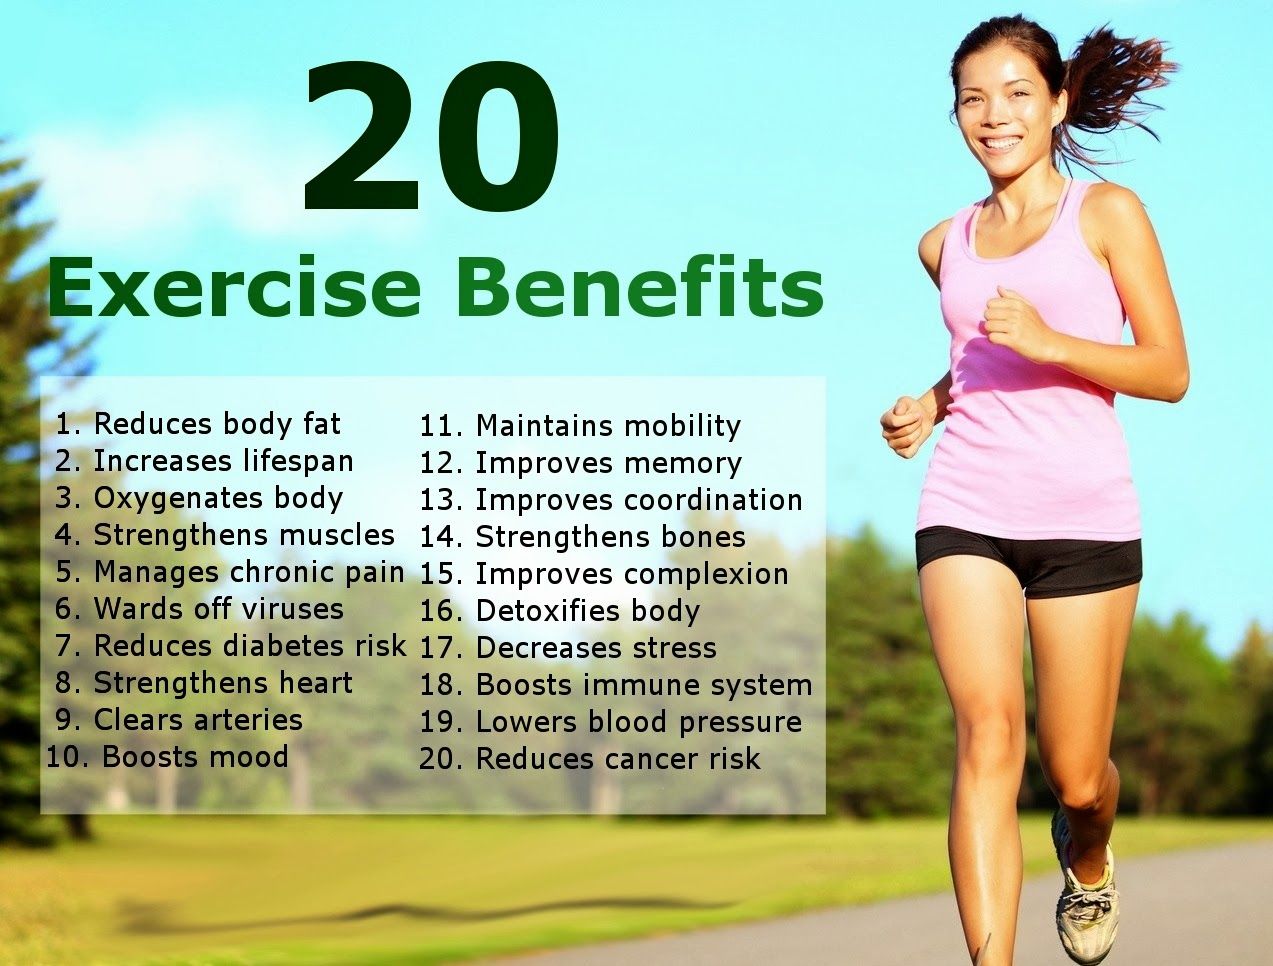 Exercise importance benefits exercising fit activity physical health fitness regular healthy lifestyle weight exercises living women daily loss body do